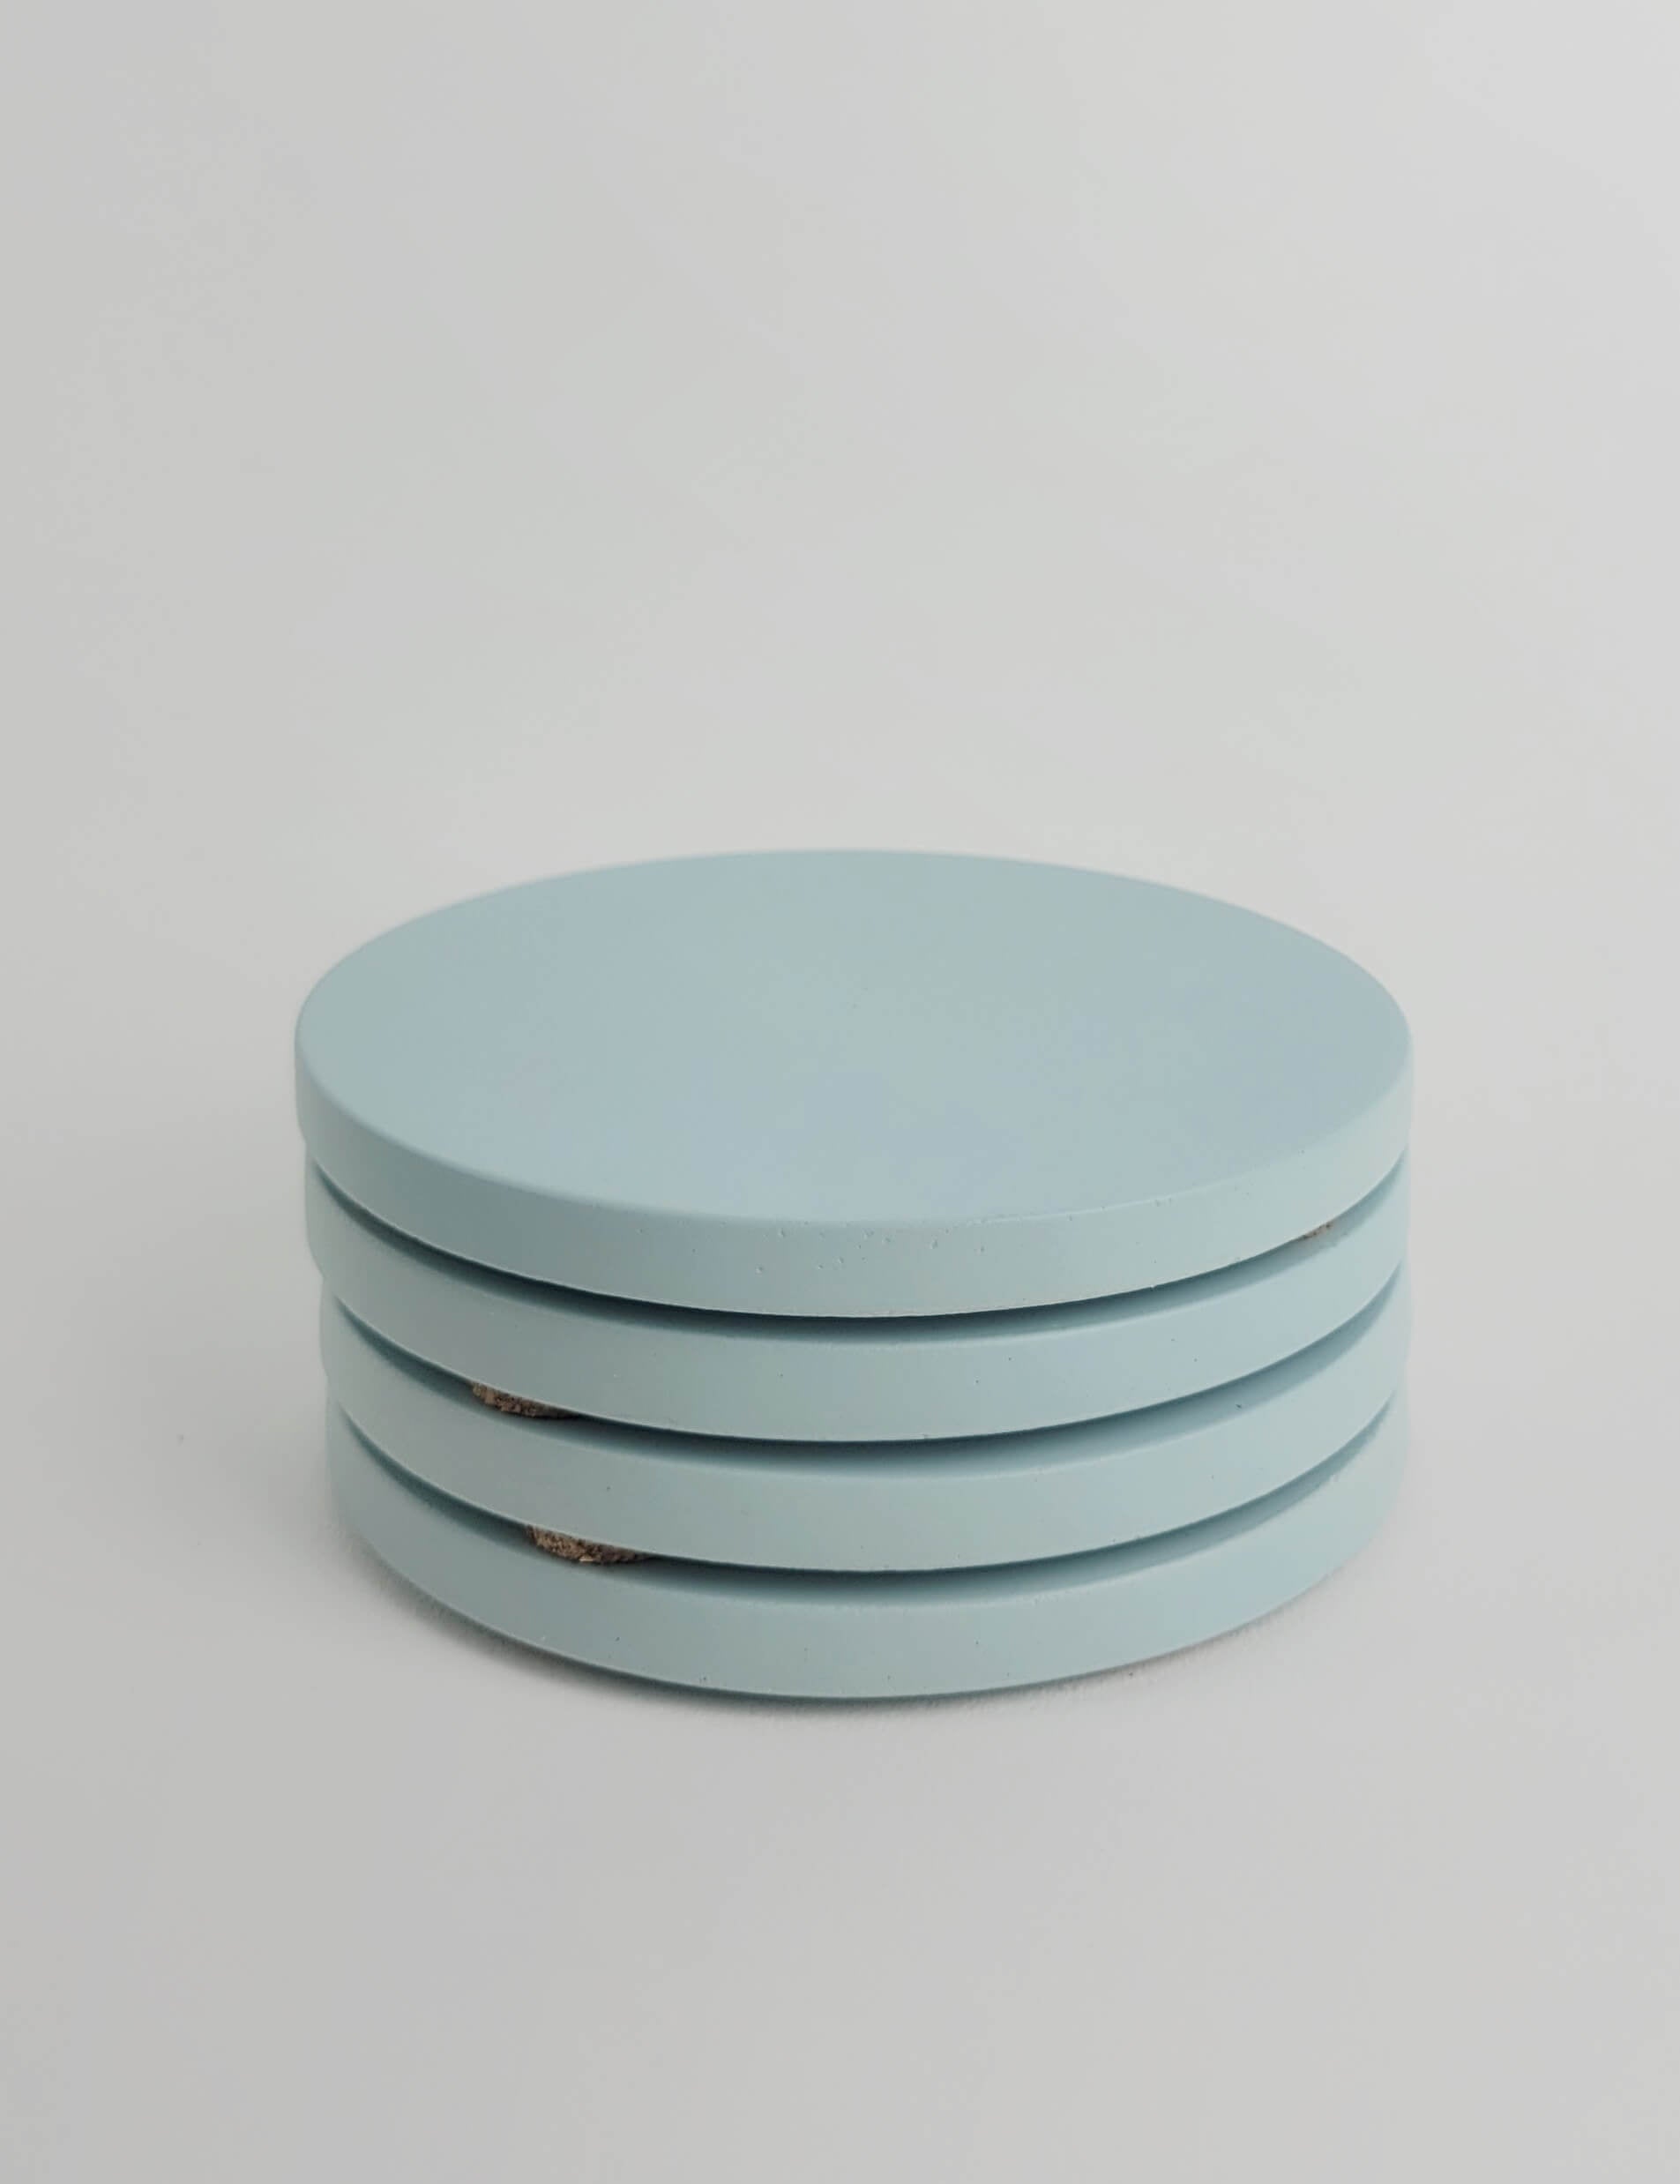 Four pastel turquoise concrete coasters neatly stacked, highlighting their smooth finish and elegant design.